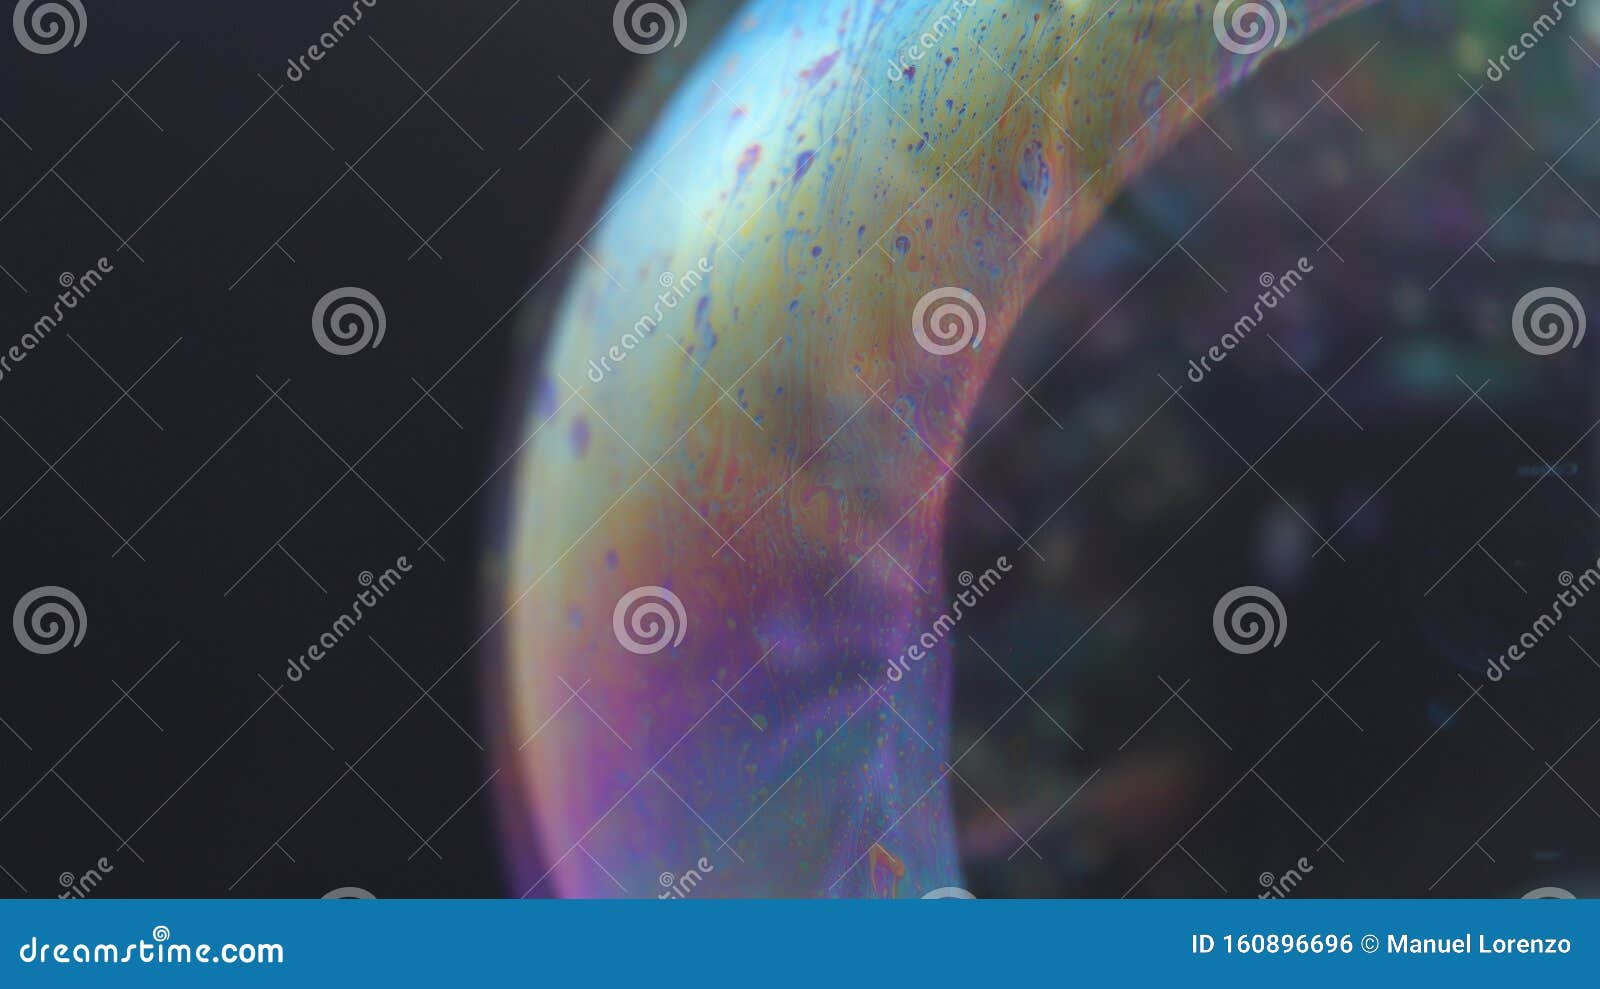 beautiful photo of a soap bubble difficult to achieve